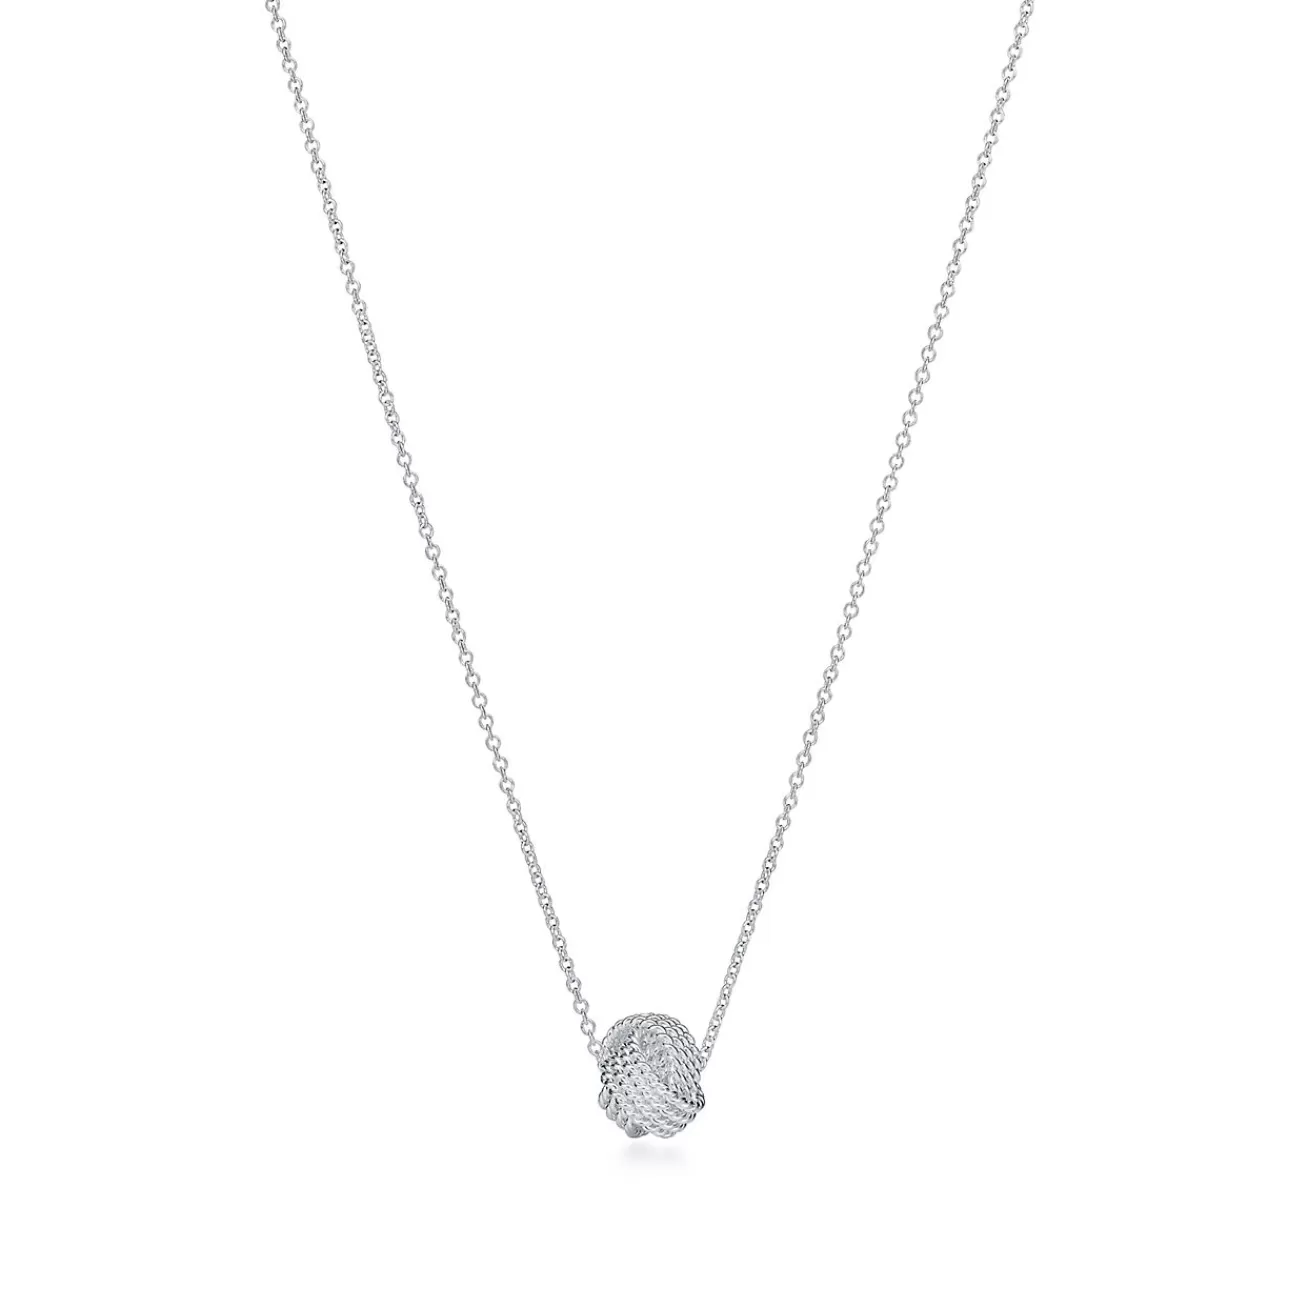 Tiffany & Co. Tiffany Twist knot pendant in sterling silver. | ^ Necklaces & Pendants | Gifts for Her